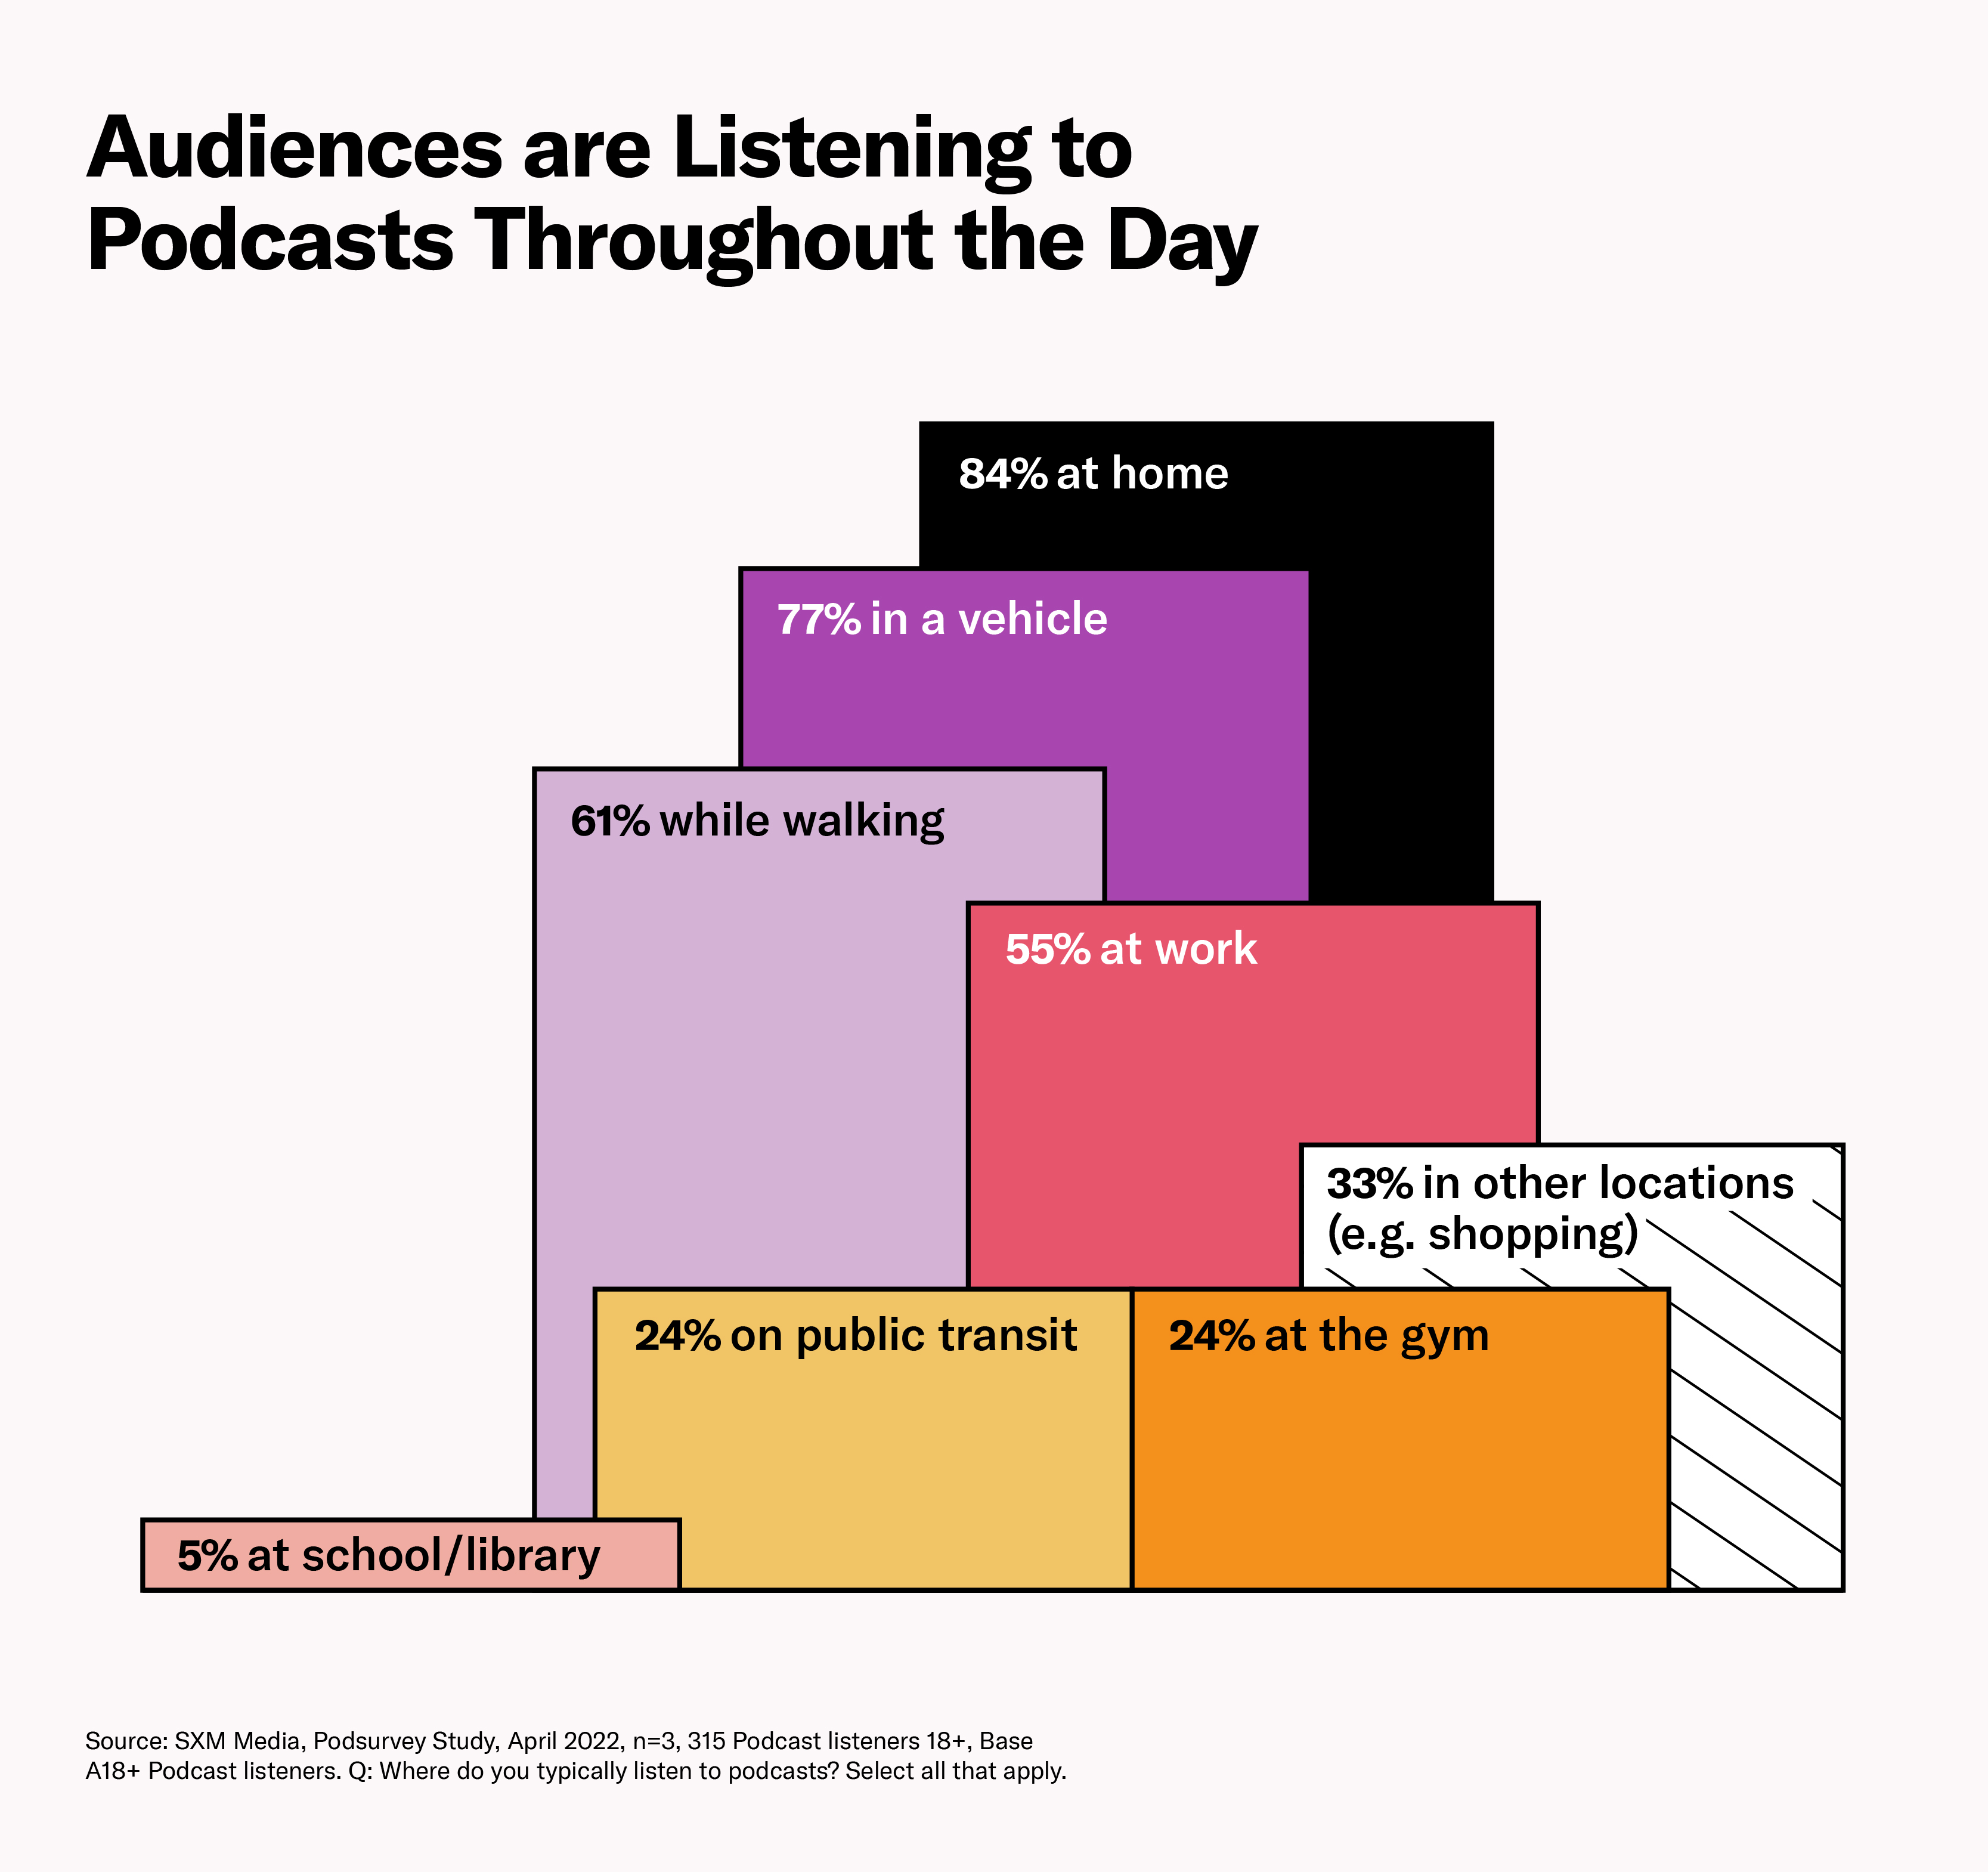 Audiences are listening to podcasts throughout the day